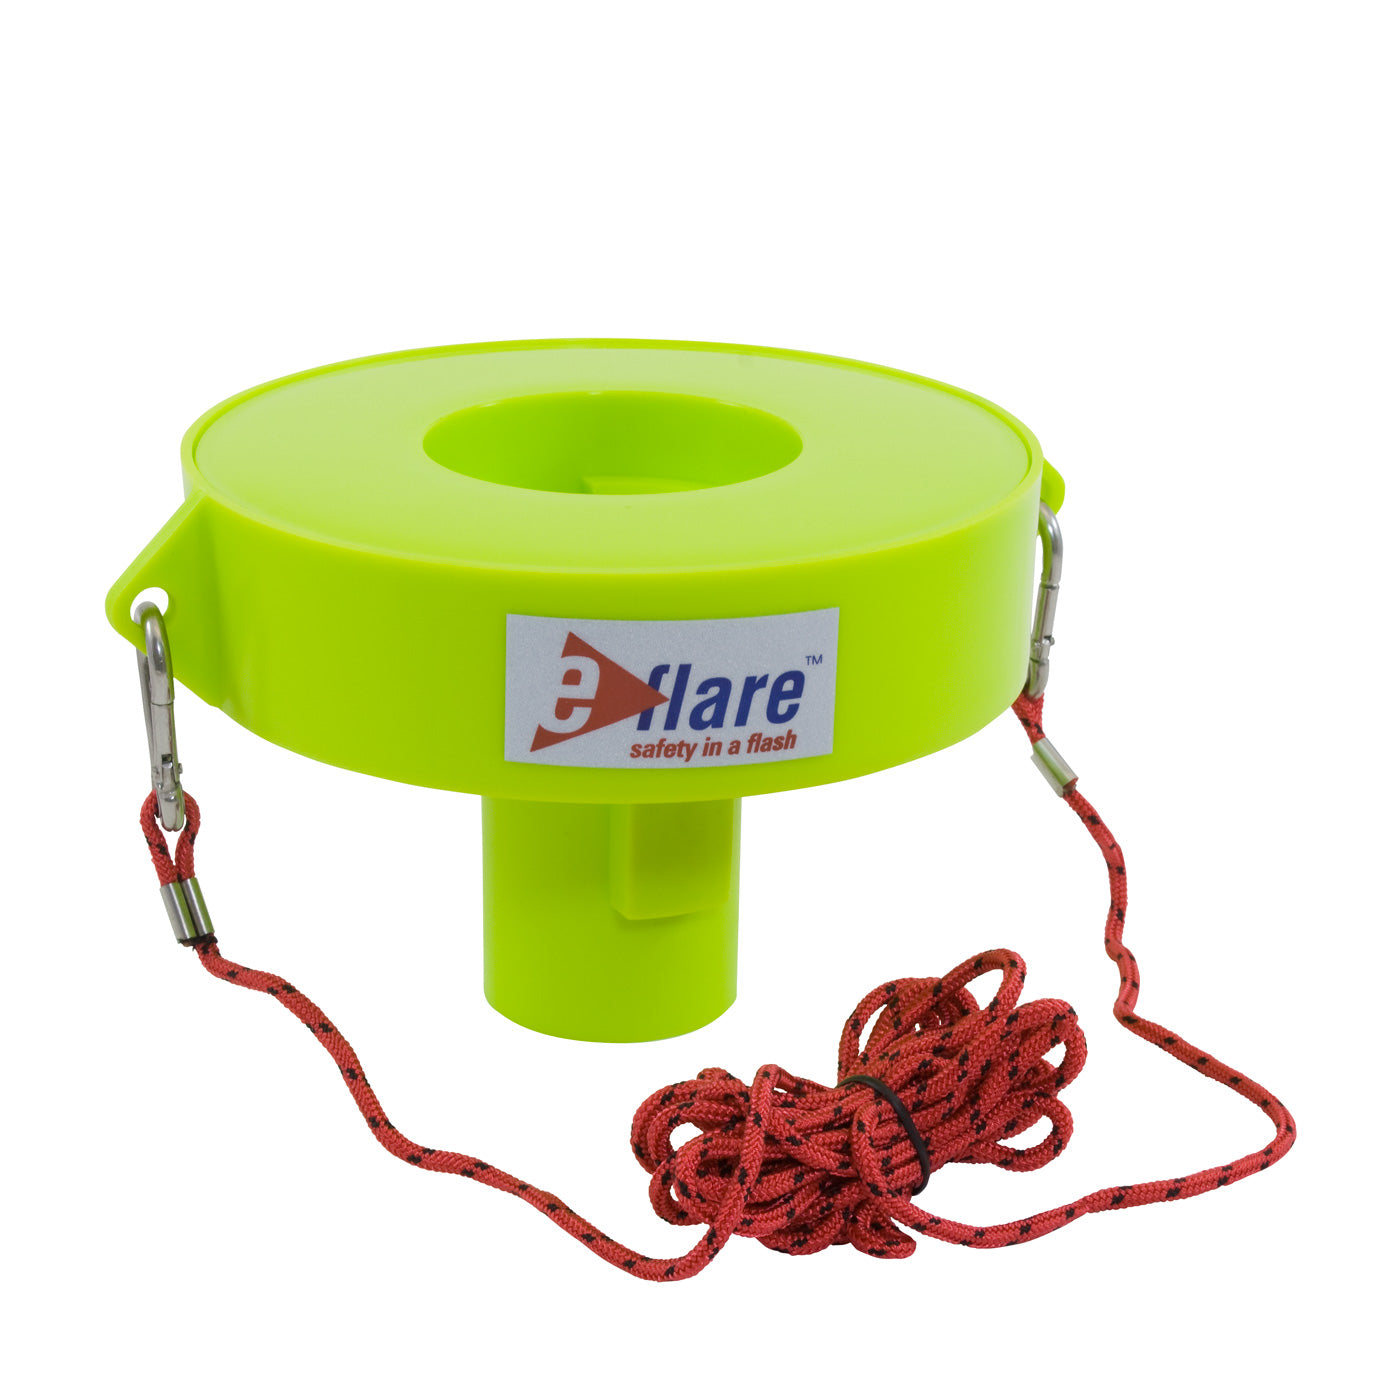 Protective Industrial Products-E-flare Flotation Collar-eSafety Supplies, Inc